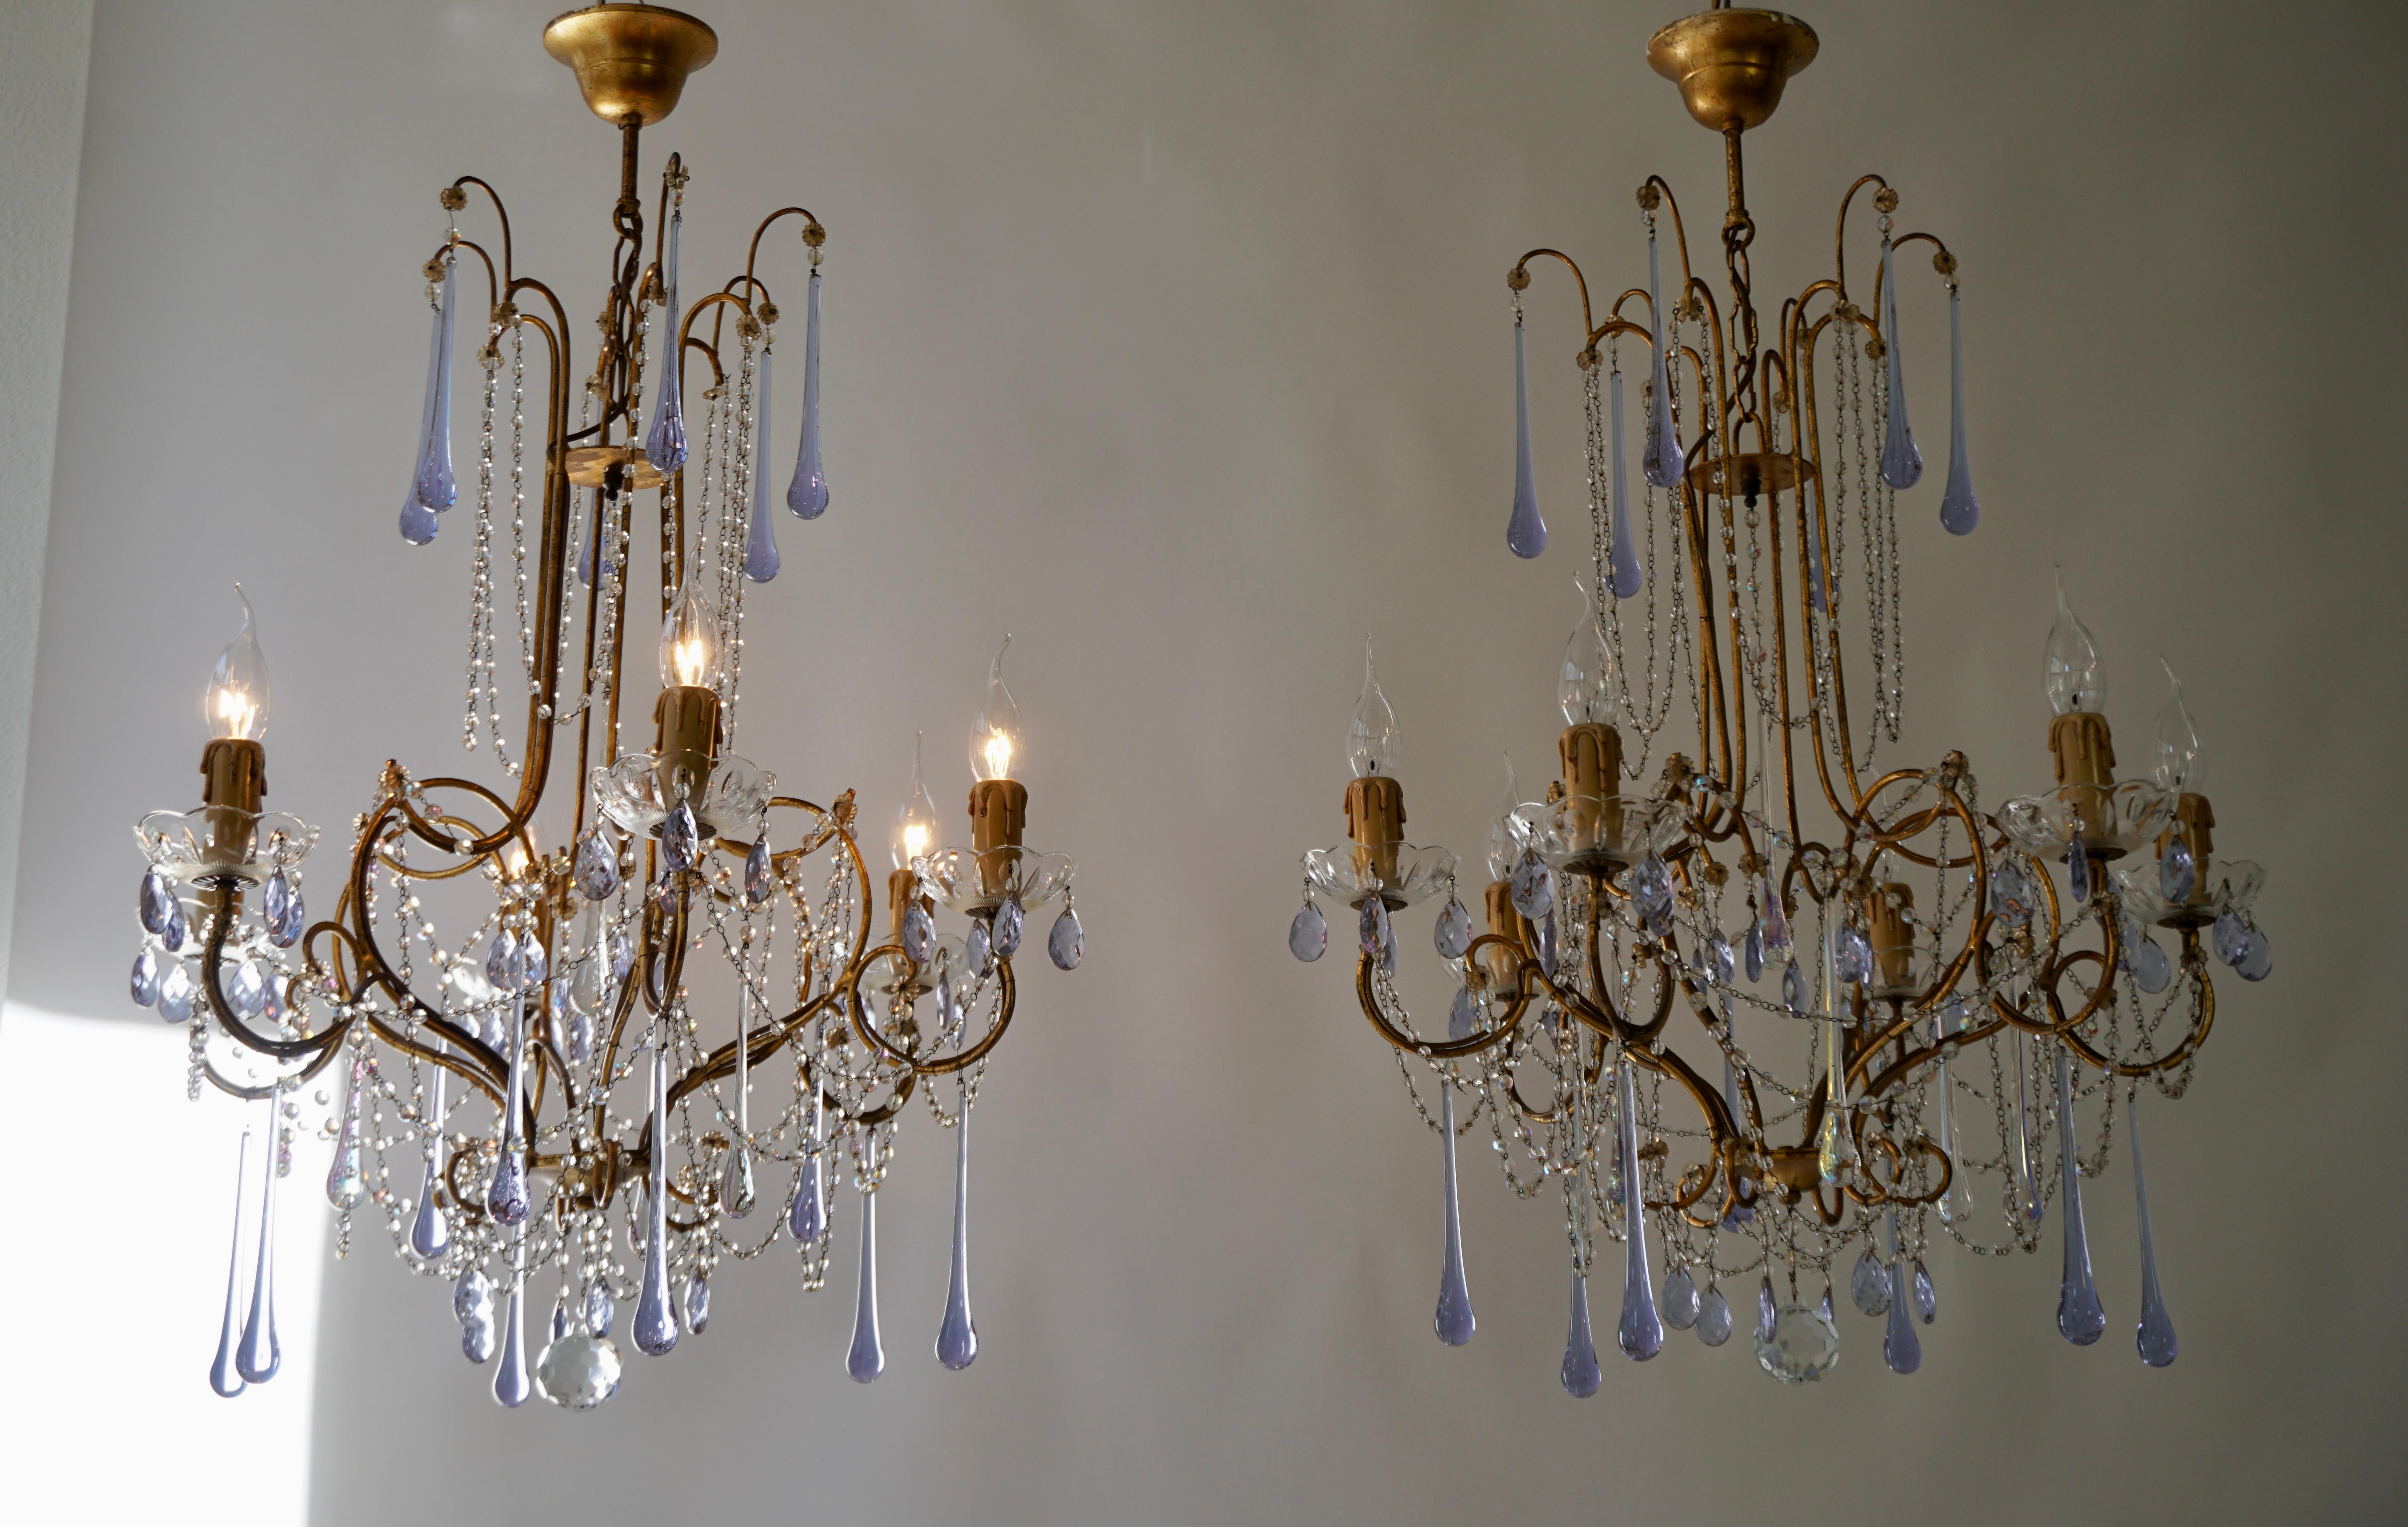 Two French six-light crystal chandeliers from the mid-20th century, with patinated brass structure and purple glass teardrops.

The light requires six single E14 screw fit lightbulbs (60Watt max.) LED compatible.

Diameter 60 cm
Height fixture 75